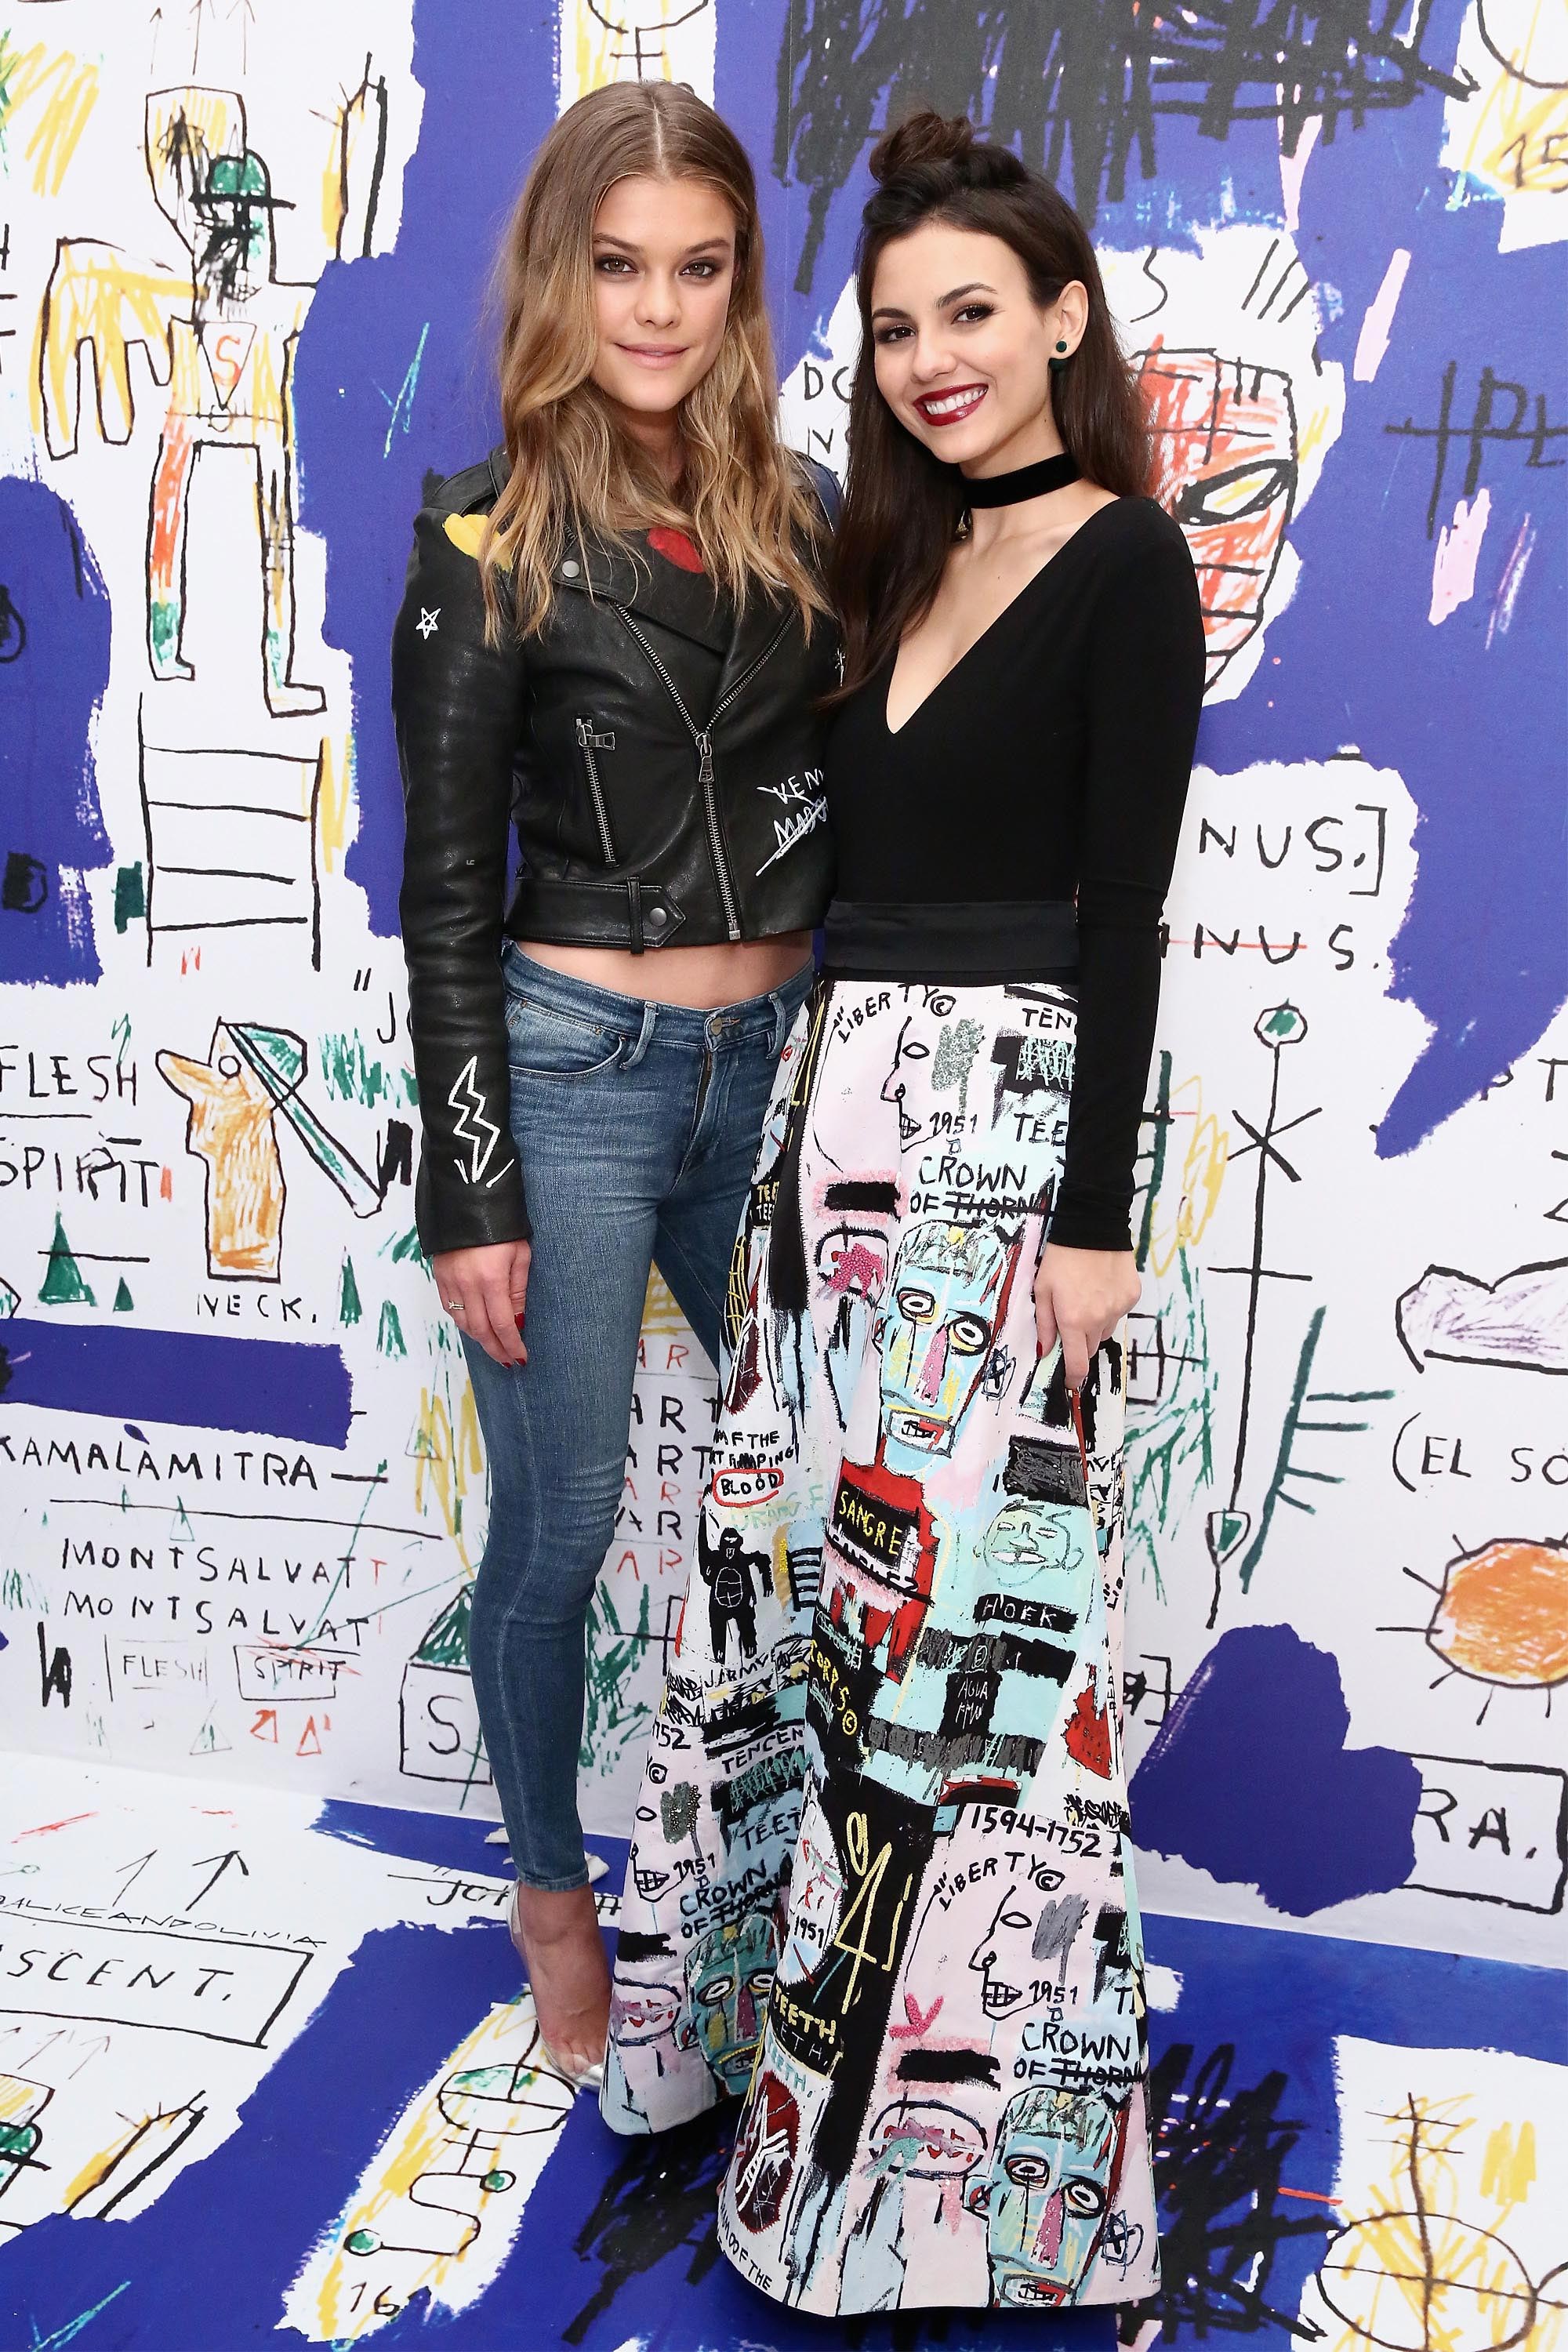 Nina Agdal attends the alice + olivia x Basquiat CFDA Capsule Collection launch party